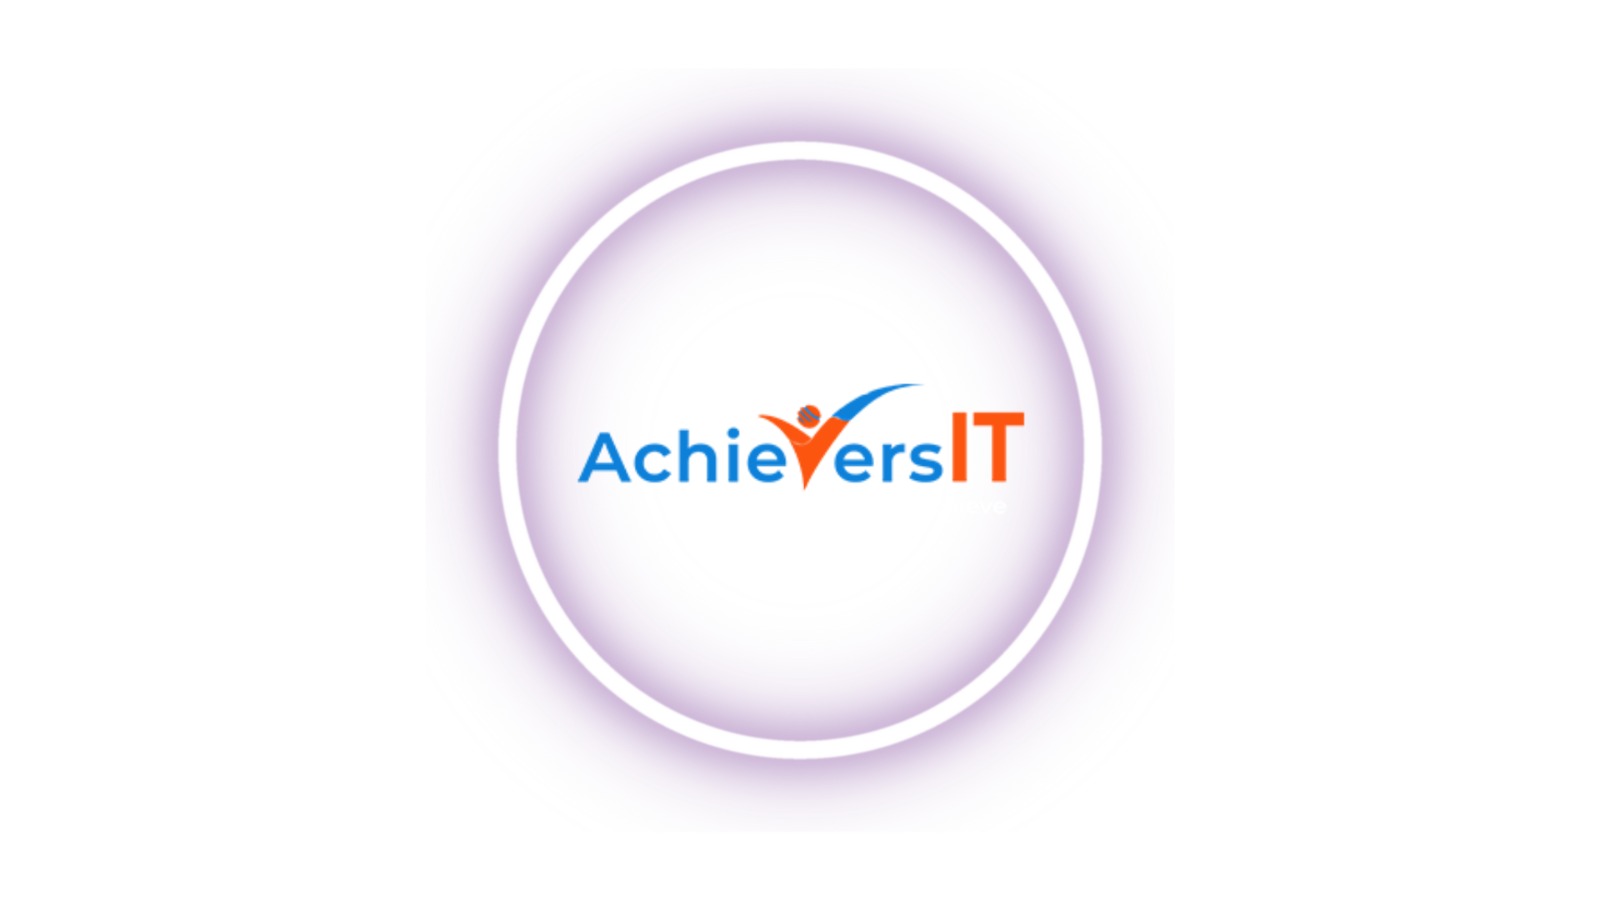 Artificial Intelligence certification training course in Bangalore | Achievers IT